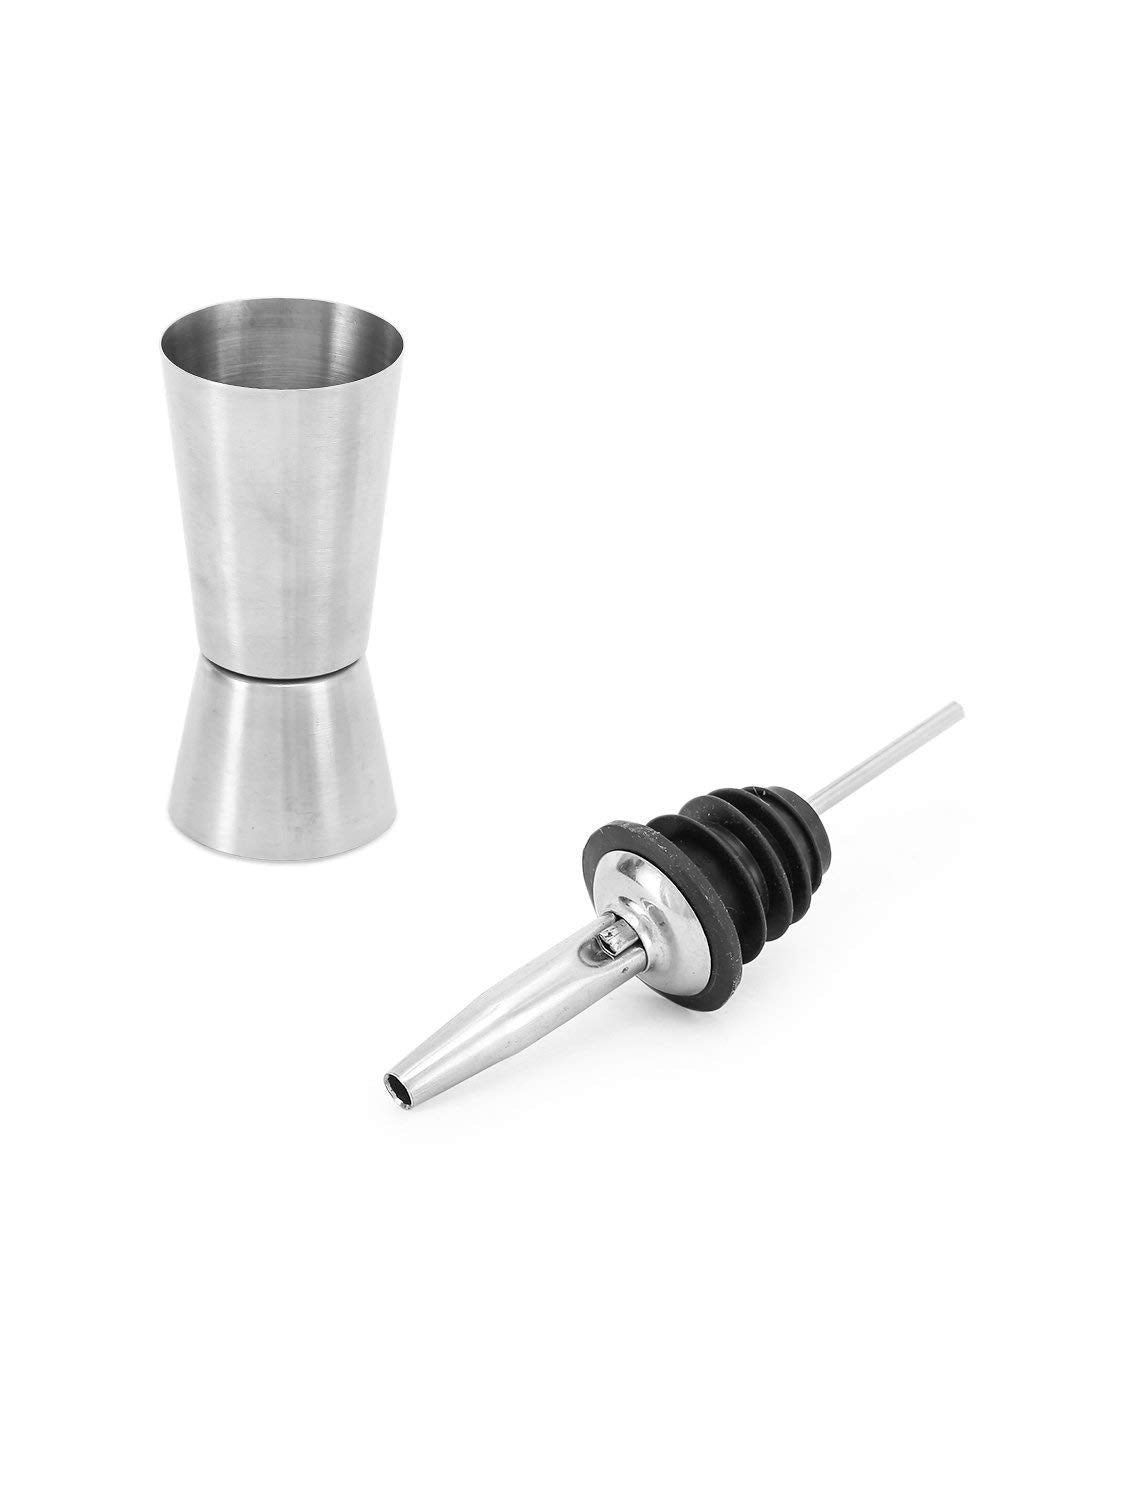 NJ OVERSEAS Stainless Steel Food Grade Peg Measure and Bottle Stopper (Silver) -Set of 2